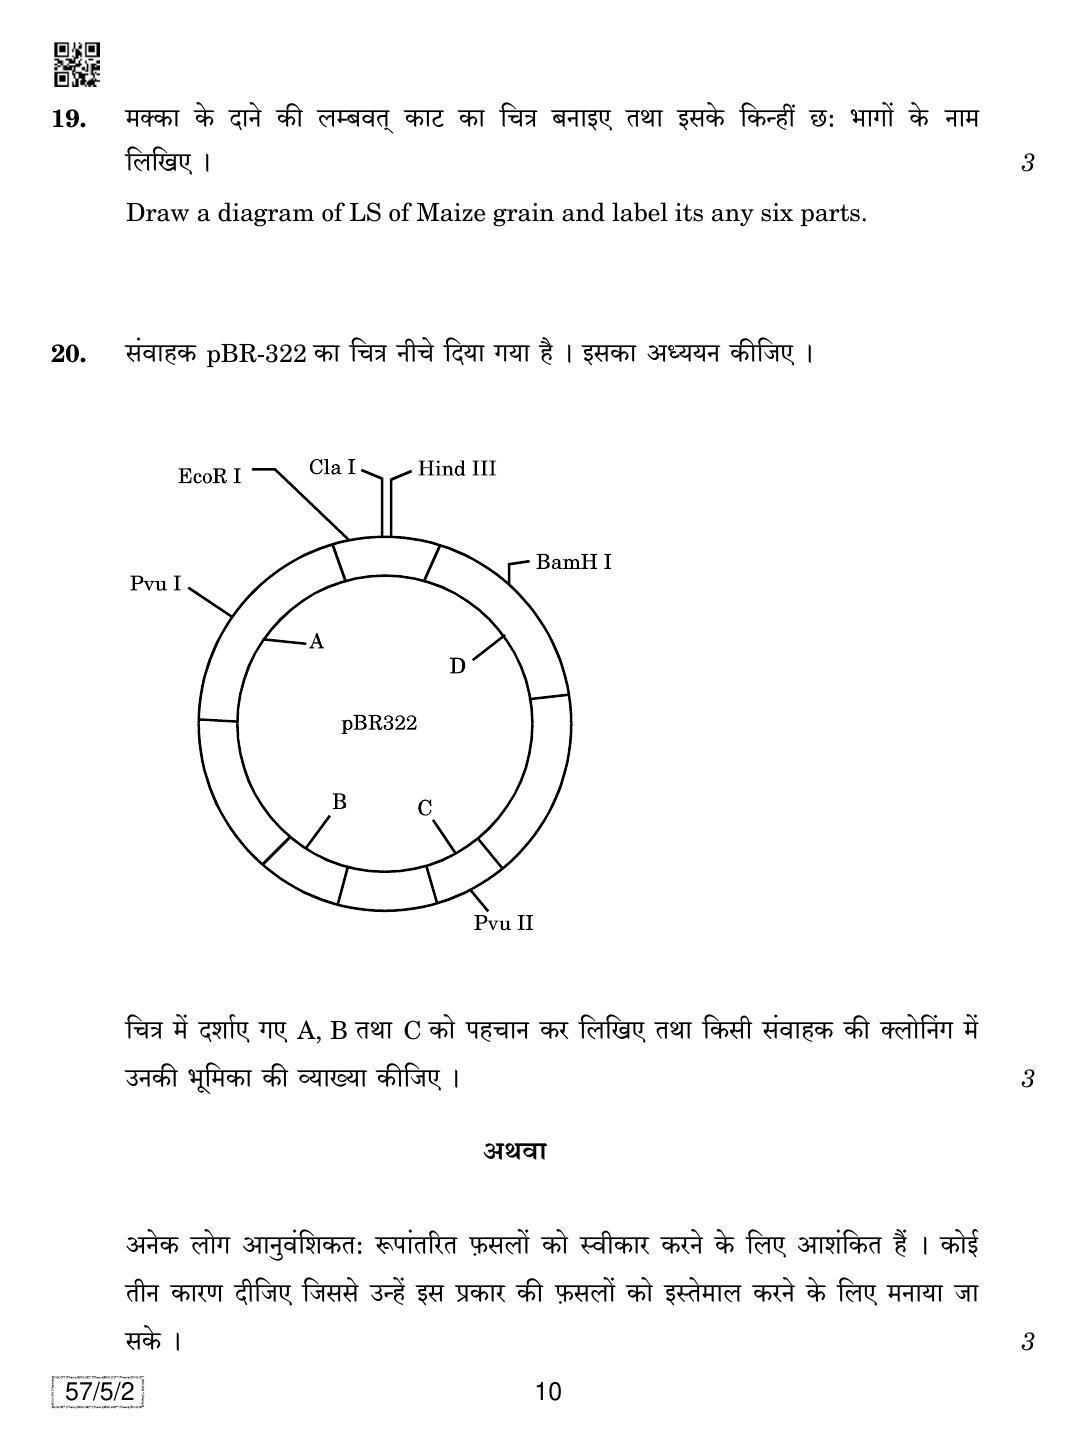 CBSE Class 12 57-5-2 Biology 2019 Question Paper - Page 10